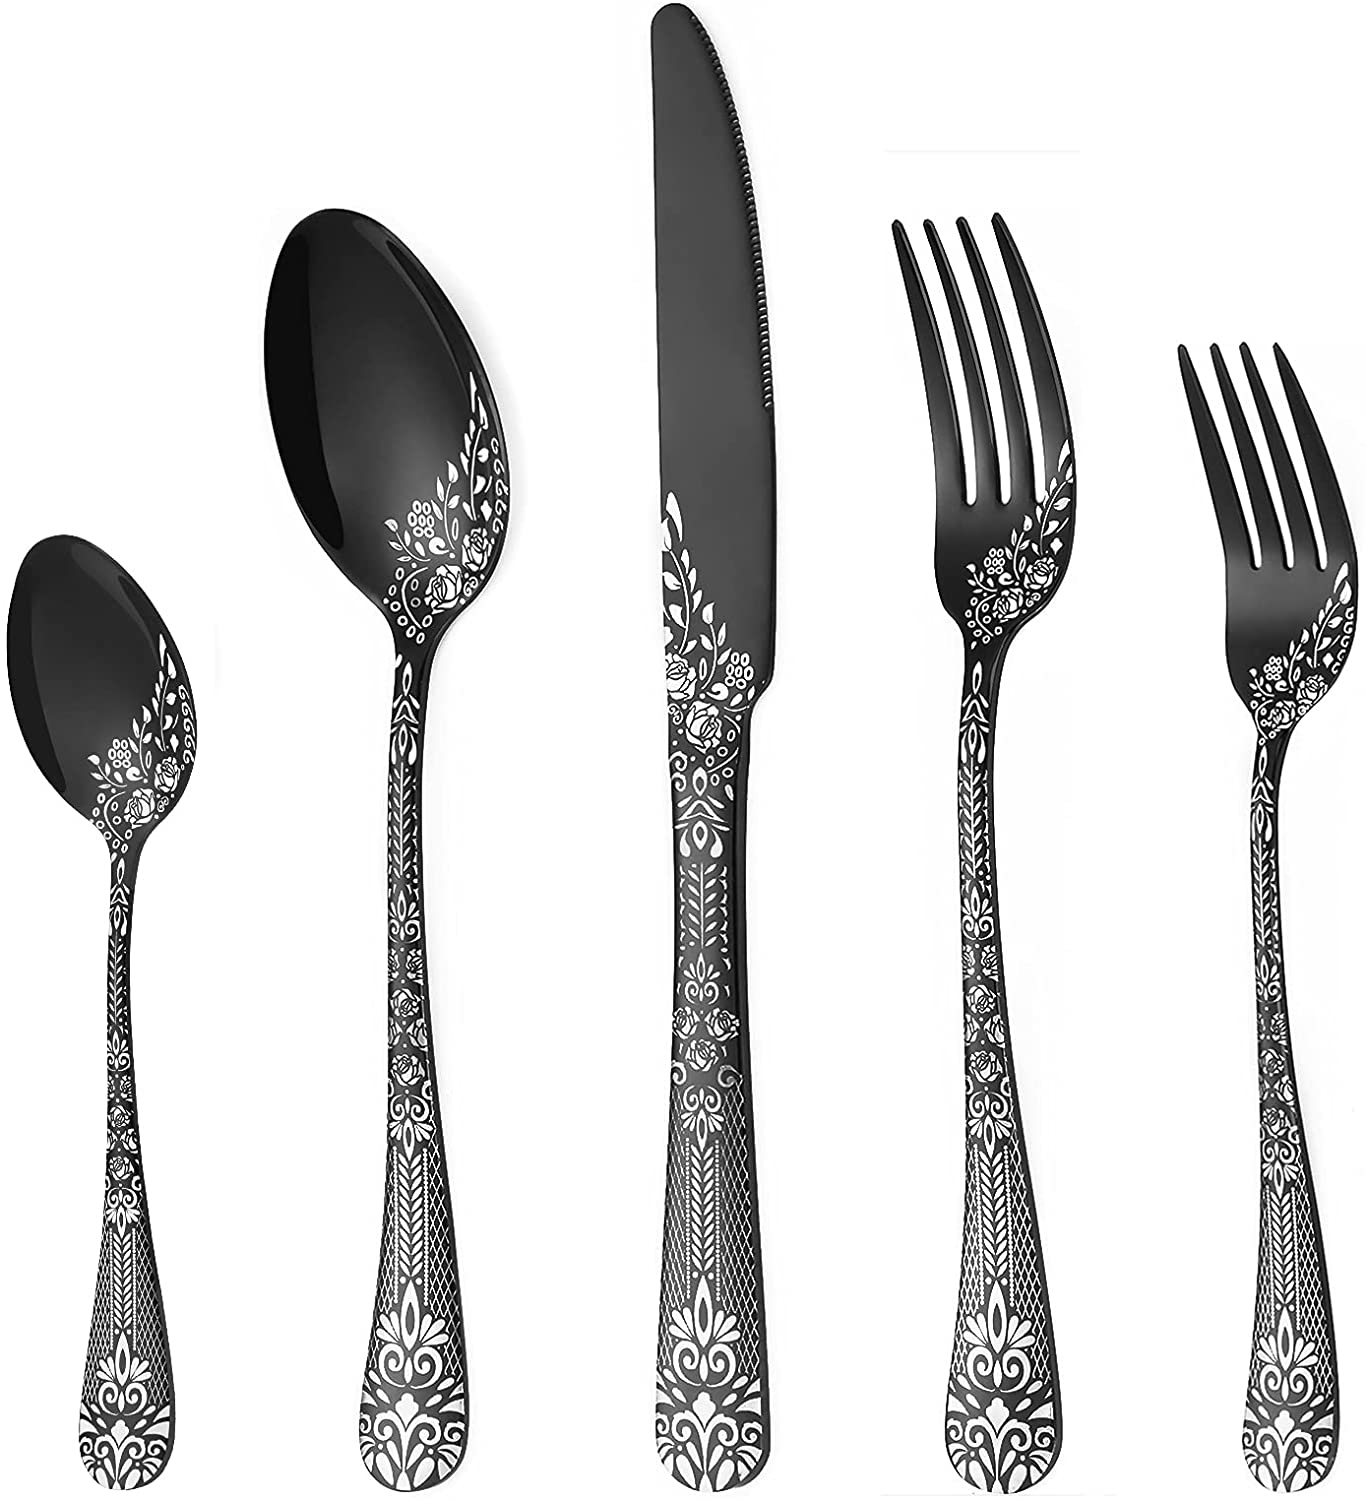 Hiware 48-Piece Silverware Set with Steak Knives for 8, Stainless Steel  Flatware Cutlery Set For Home Kitchen Restaurant Hotel, Mirror Polished